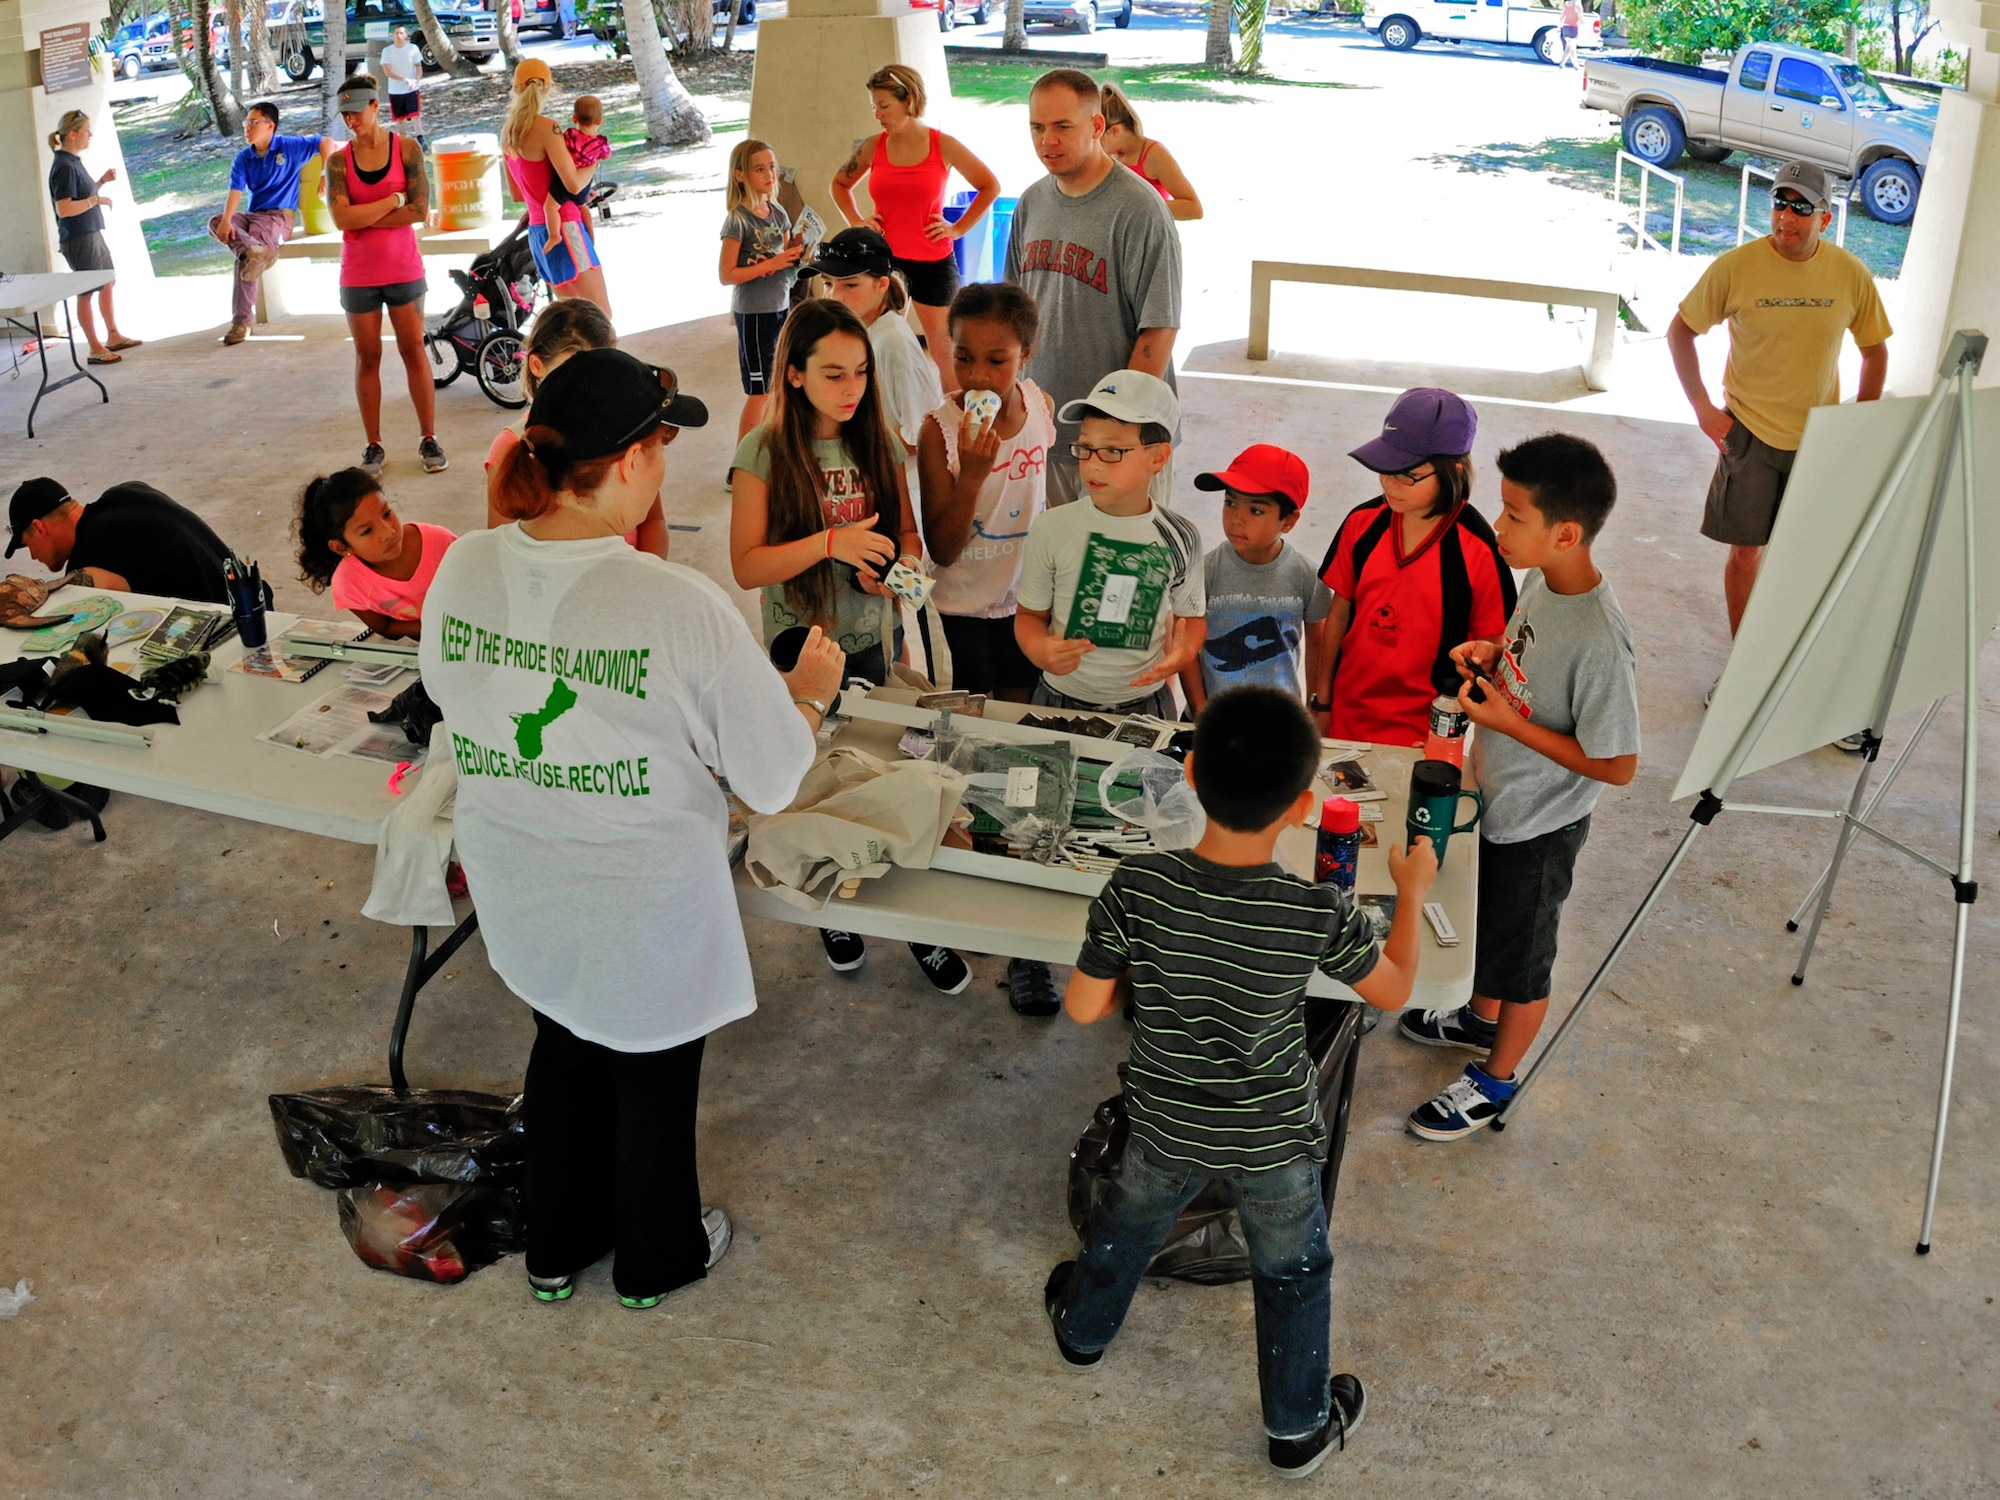 Young volunteers play games that promote environmental conservation during the Earth Day event at Andersen Air Force Base, Guam, April 21, 2013. In celebration of Earth Day, the 36th Civil Engineer Squadron environmental flight facilitated a beach cleanup, displayed natural, cultural and historical exhibits, offered educational games and gave out prizes to promote environmental awareness. (U.S. Air Force photo by Airman 1st Class Marianique Santos/Released)